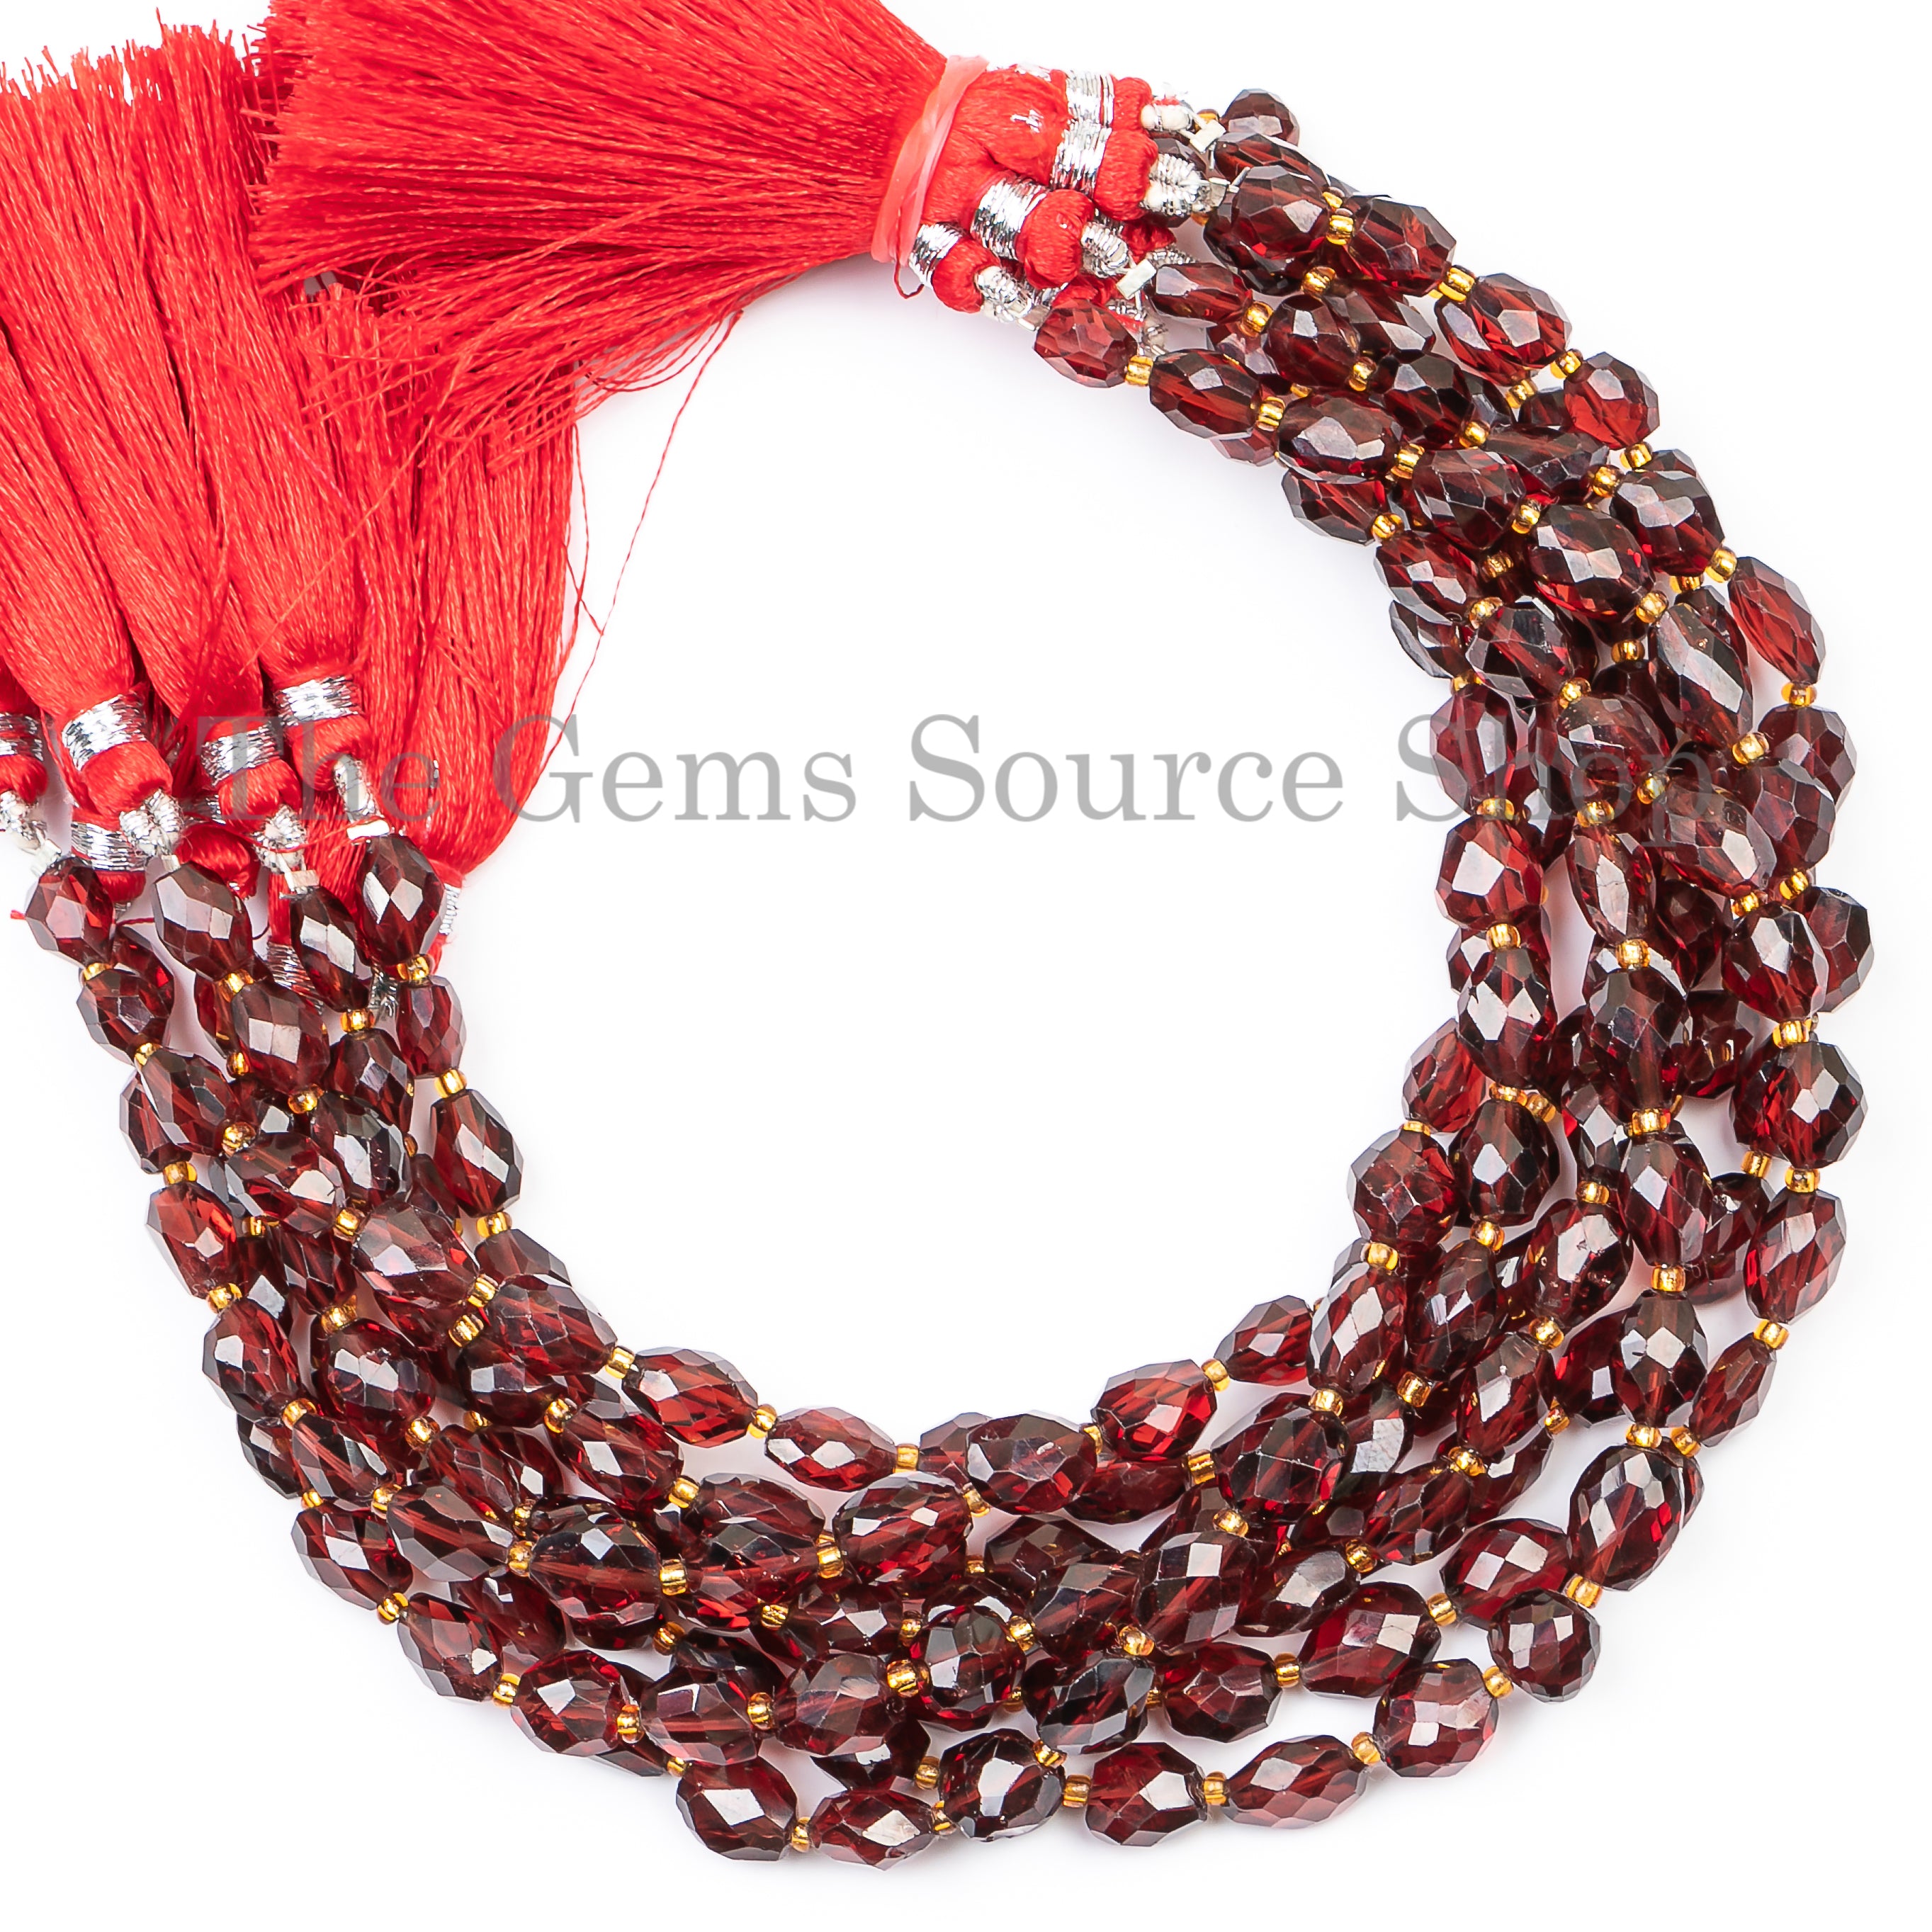 New Arrival Garnet Faceted Fancy Nugget Beads, Garnet Beads For Jewelry Making